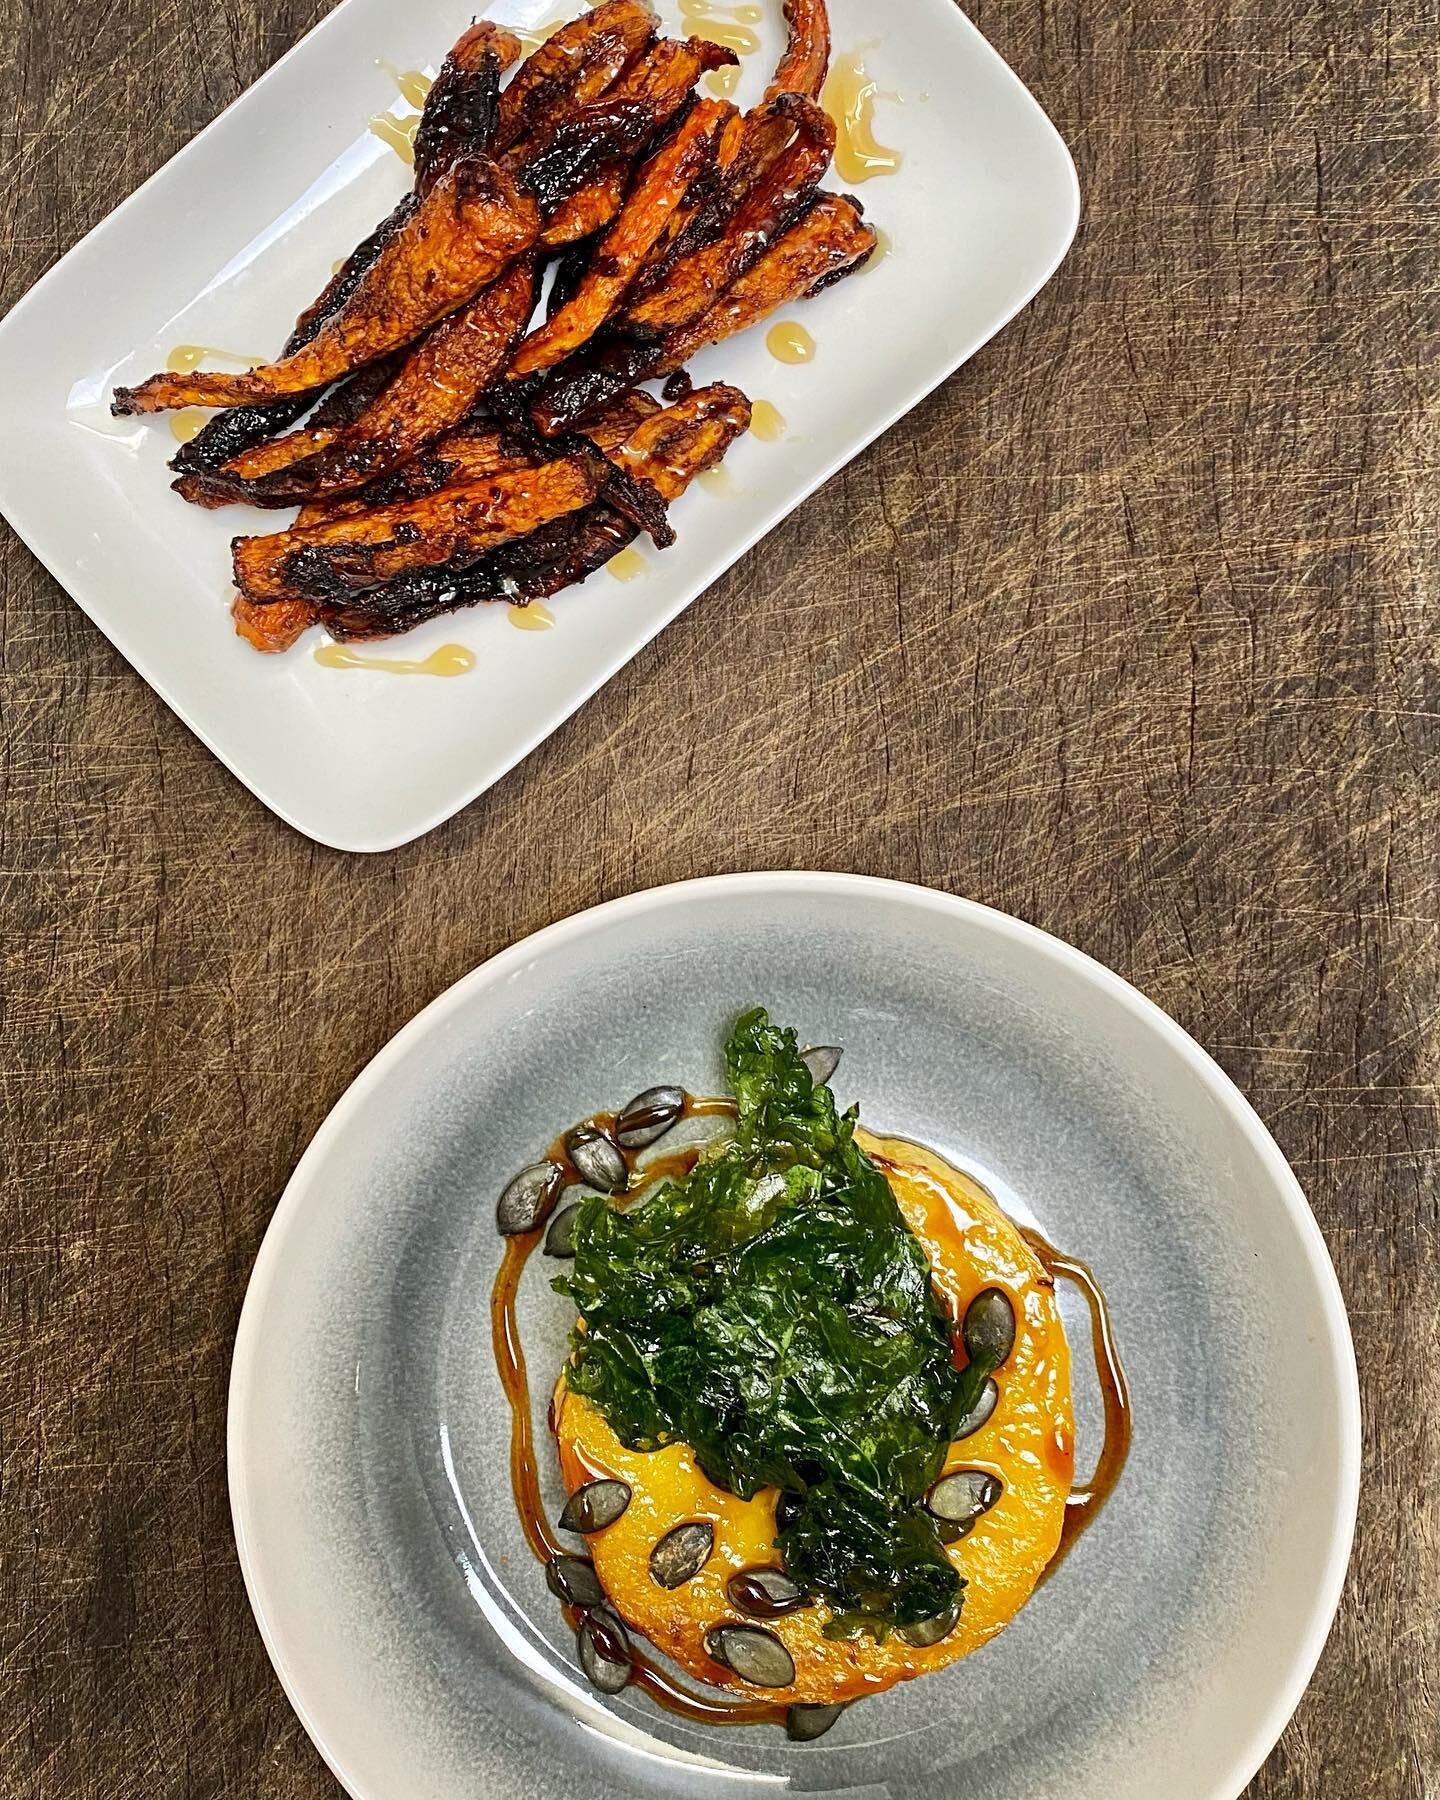 When your side plates steal the show. Award-winning @thefallsfarm produce features on our menu and these honey-miso carrots and gramma pumpkin sides are as tasty as they are good for you. Make a meal out of a few or share them together.